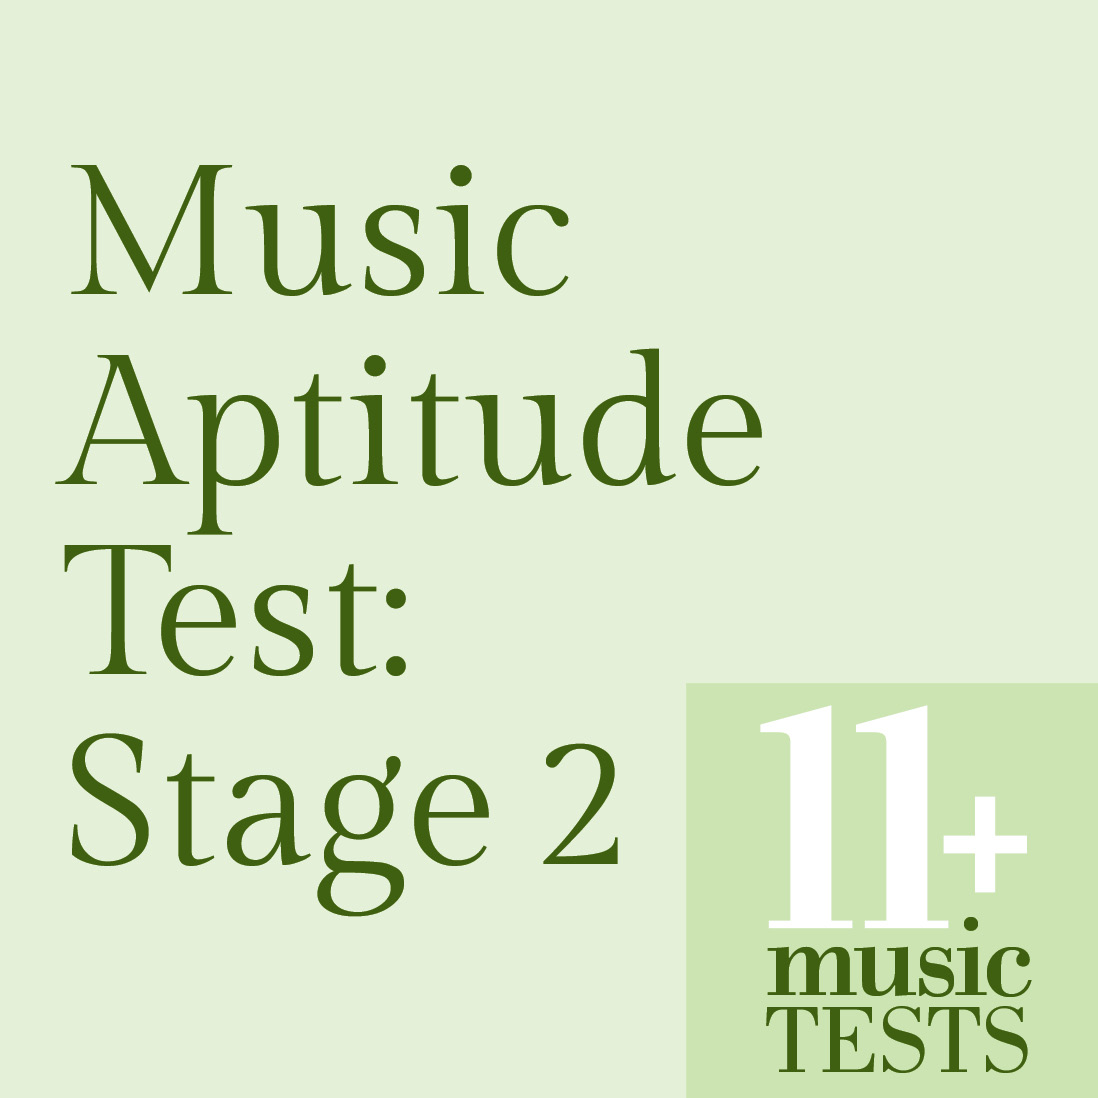 every-year-the-students-at-a-school-are-given-a-musical-aptitude-test-that-rates-them-from-0